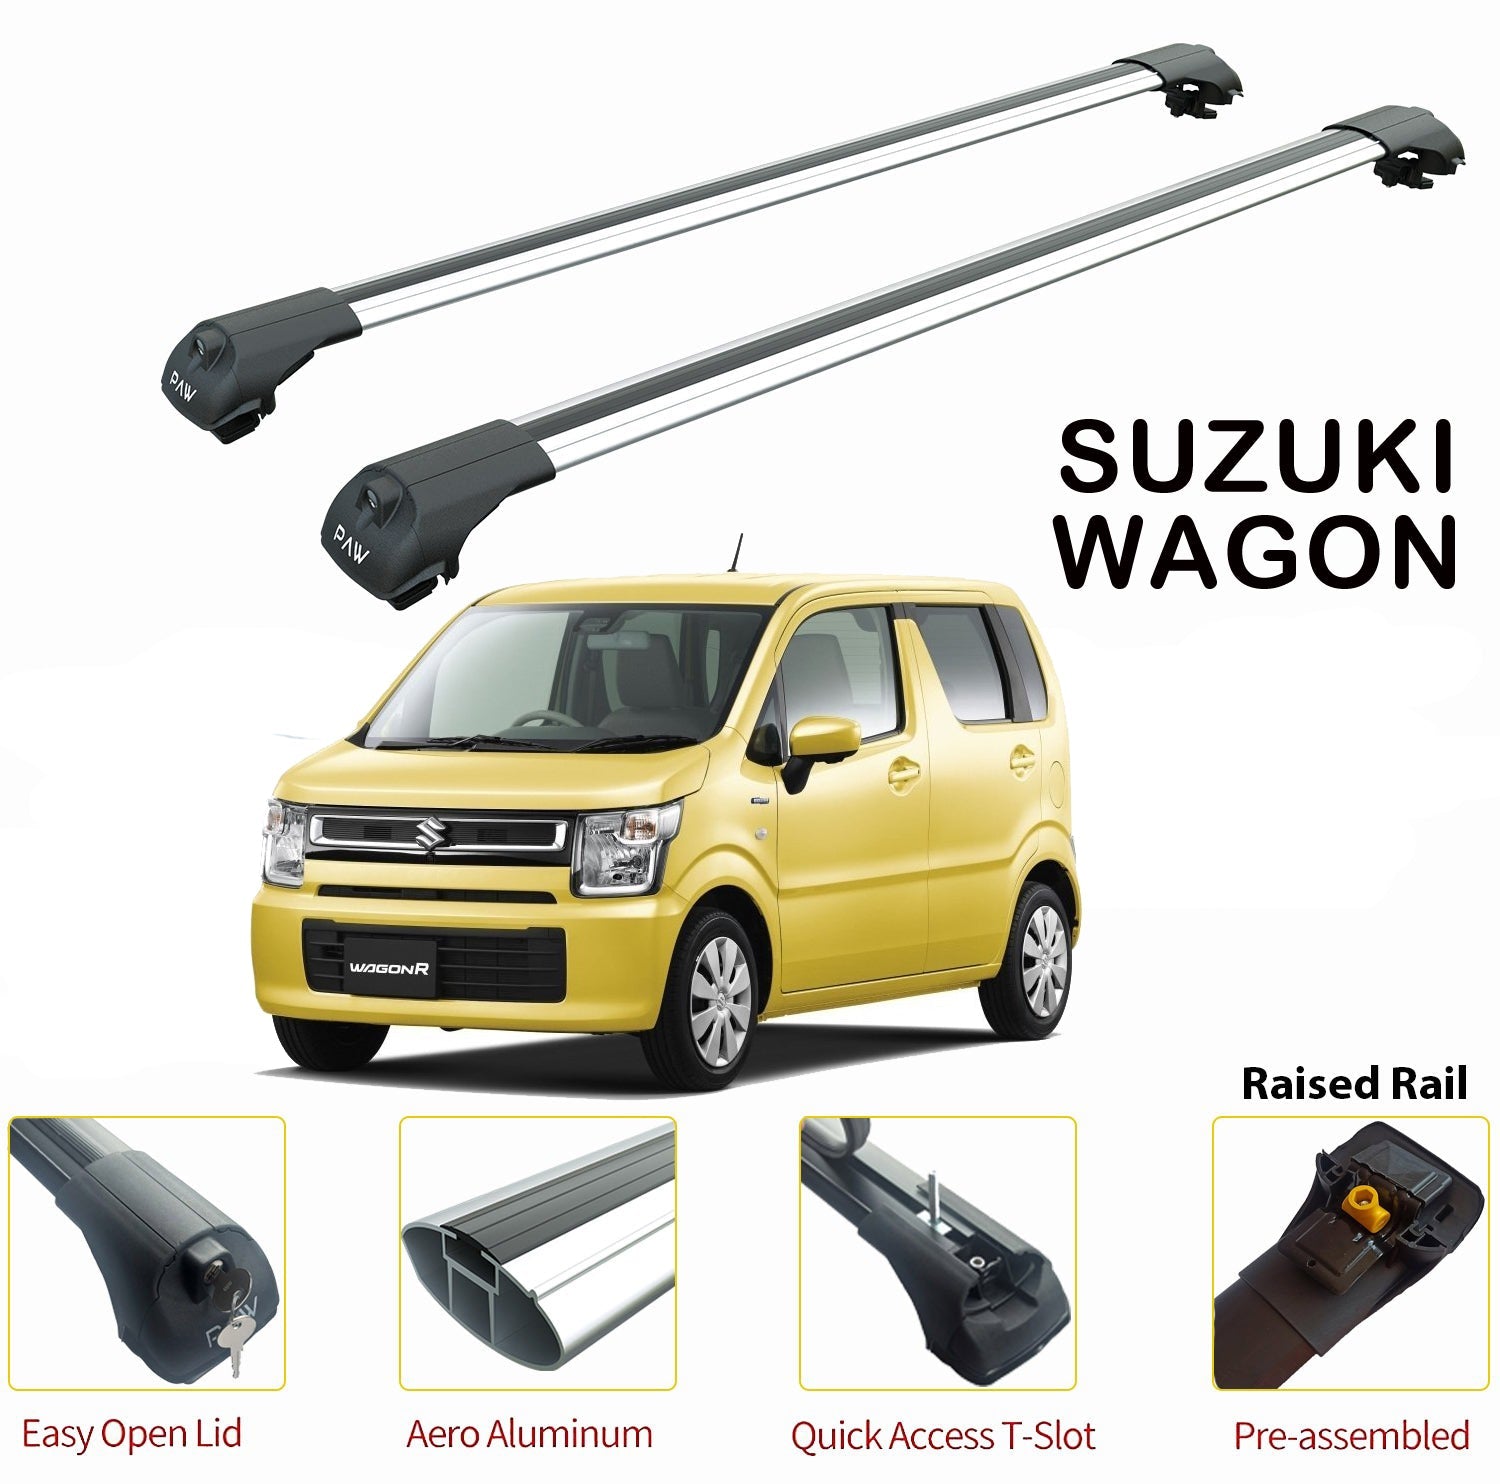 For Suzuki Wagon R 2008-Up Roof Rack System Carrier Cross Bars Aluminum Lockable High Quality of Metal Bracket Silver-1